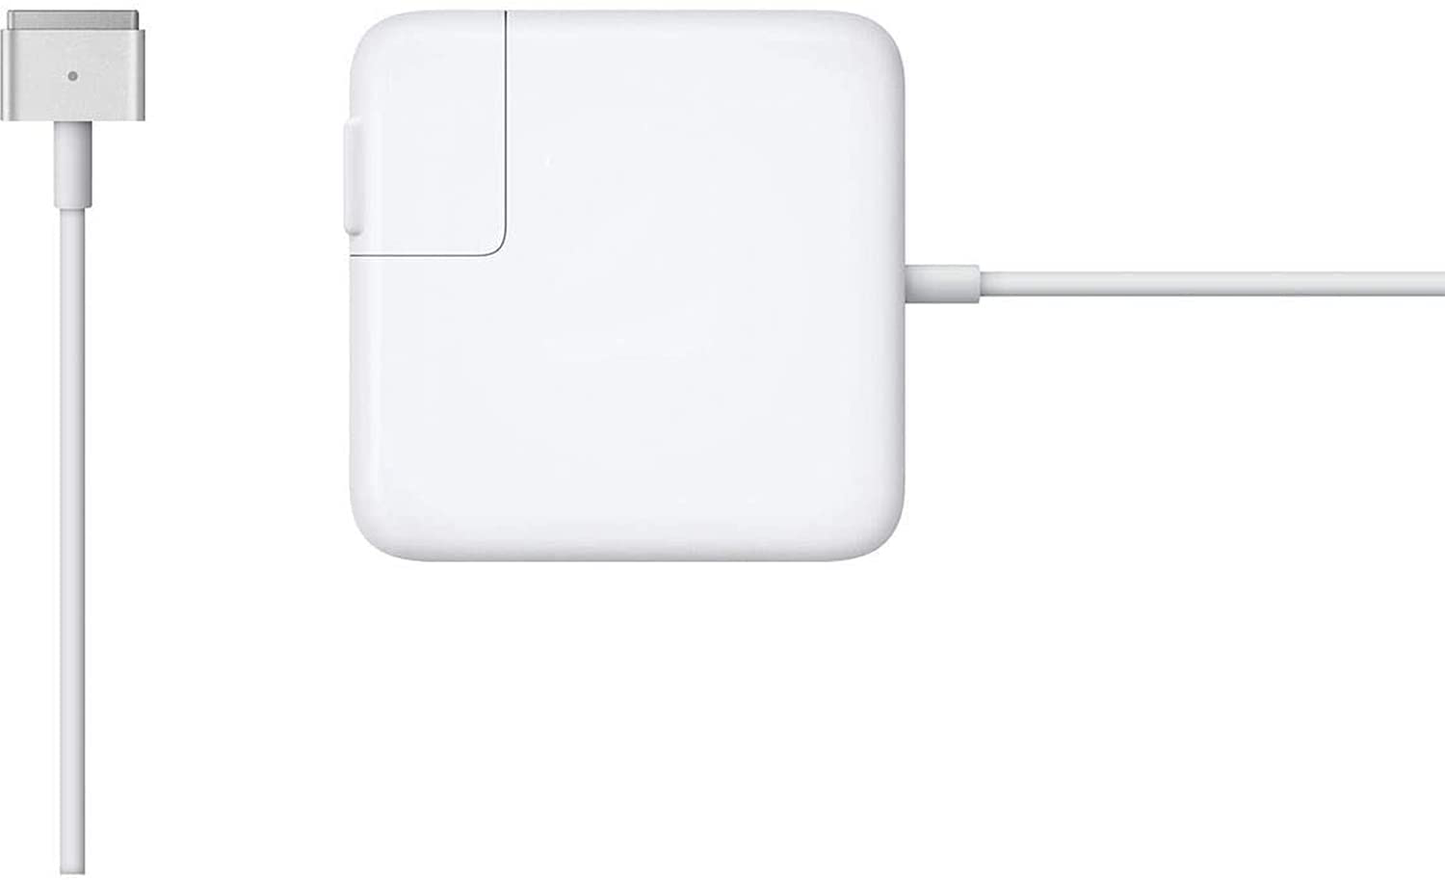 Tissyee MacBook Air Charger, 45W Magnetic Mag2 T-Tip Charger, Universal Charger for Mac Book Air 11-inch 13 inch 2012Late